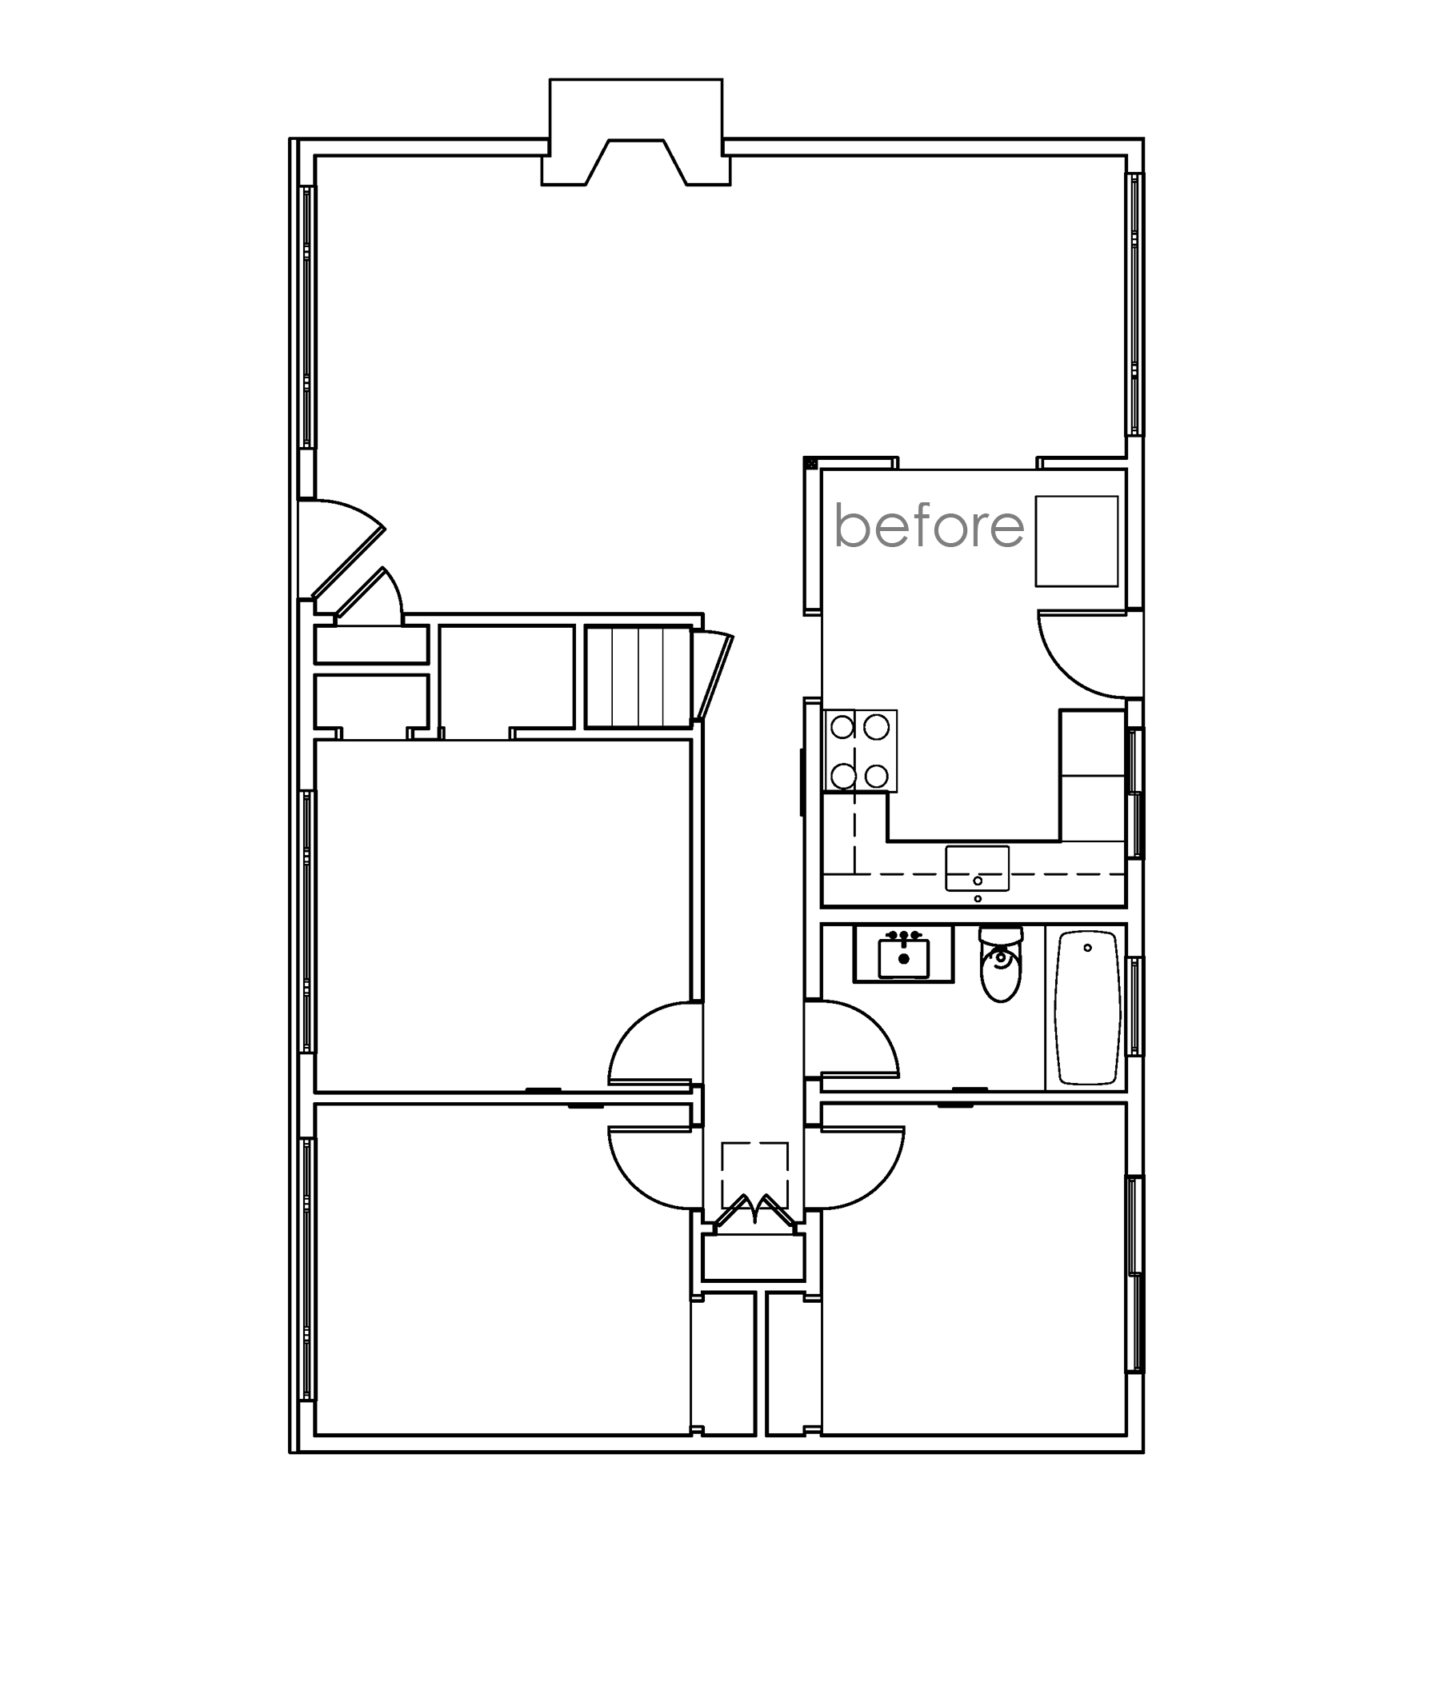 Floor plans of Madrona remodel project in Seattle, WA